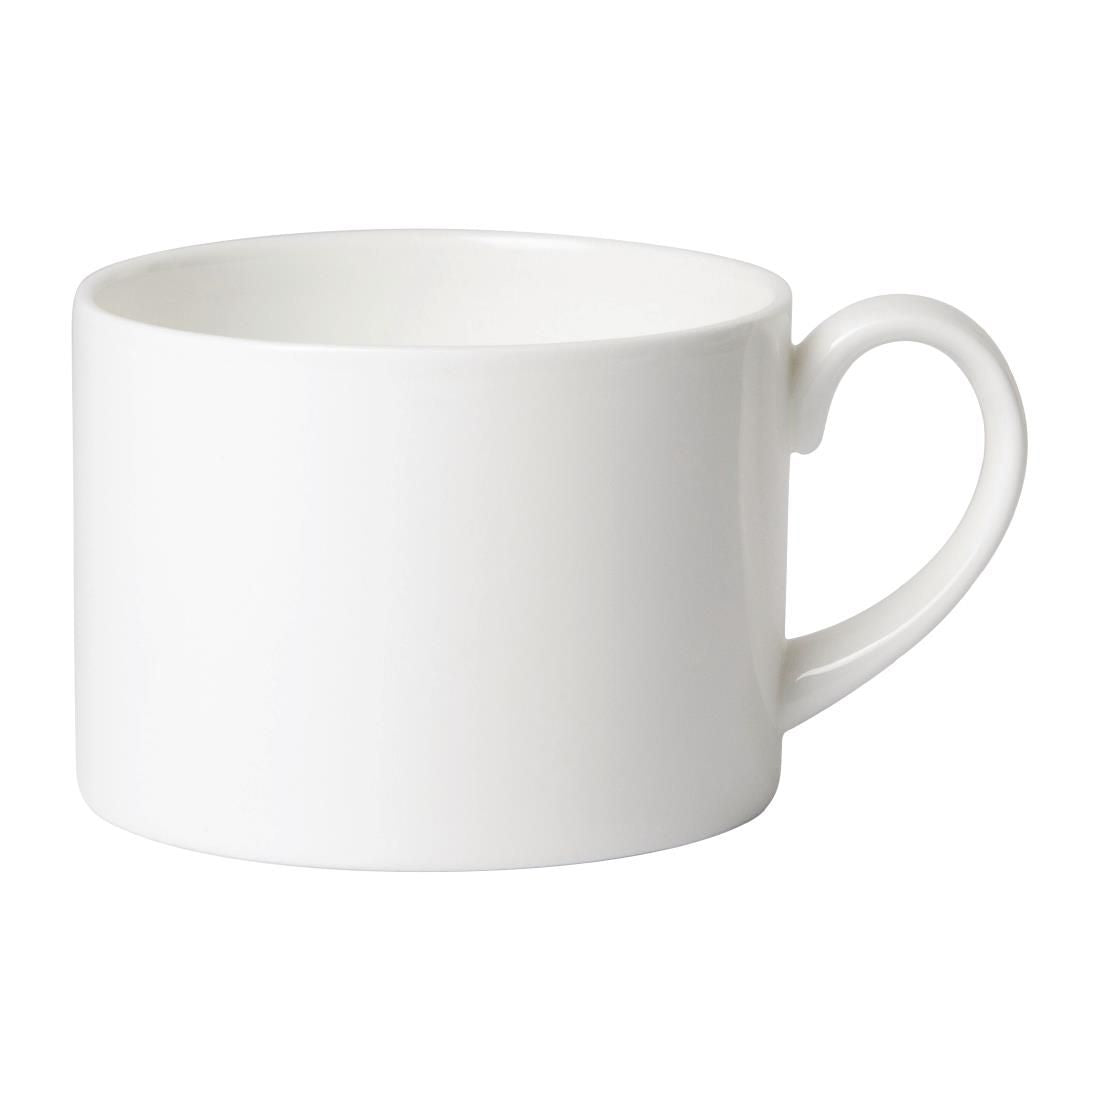 FE025 Royal Crown Derby Whitehall Beverage Cup (Pack of 6) JD Catering Equipment Solutions Ltd